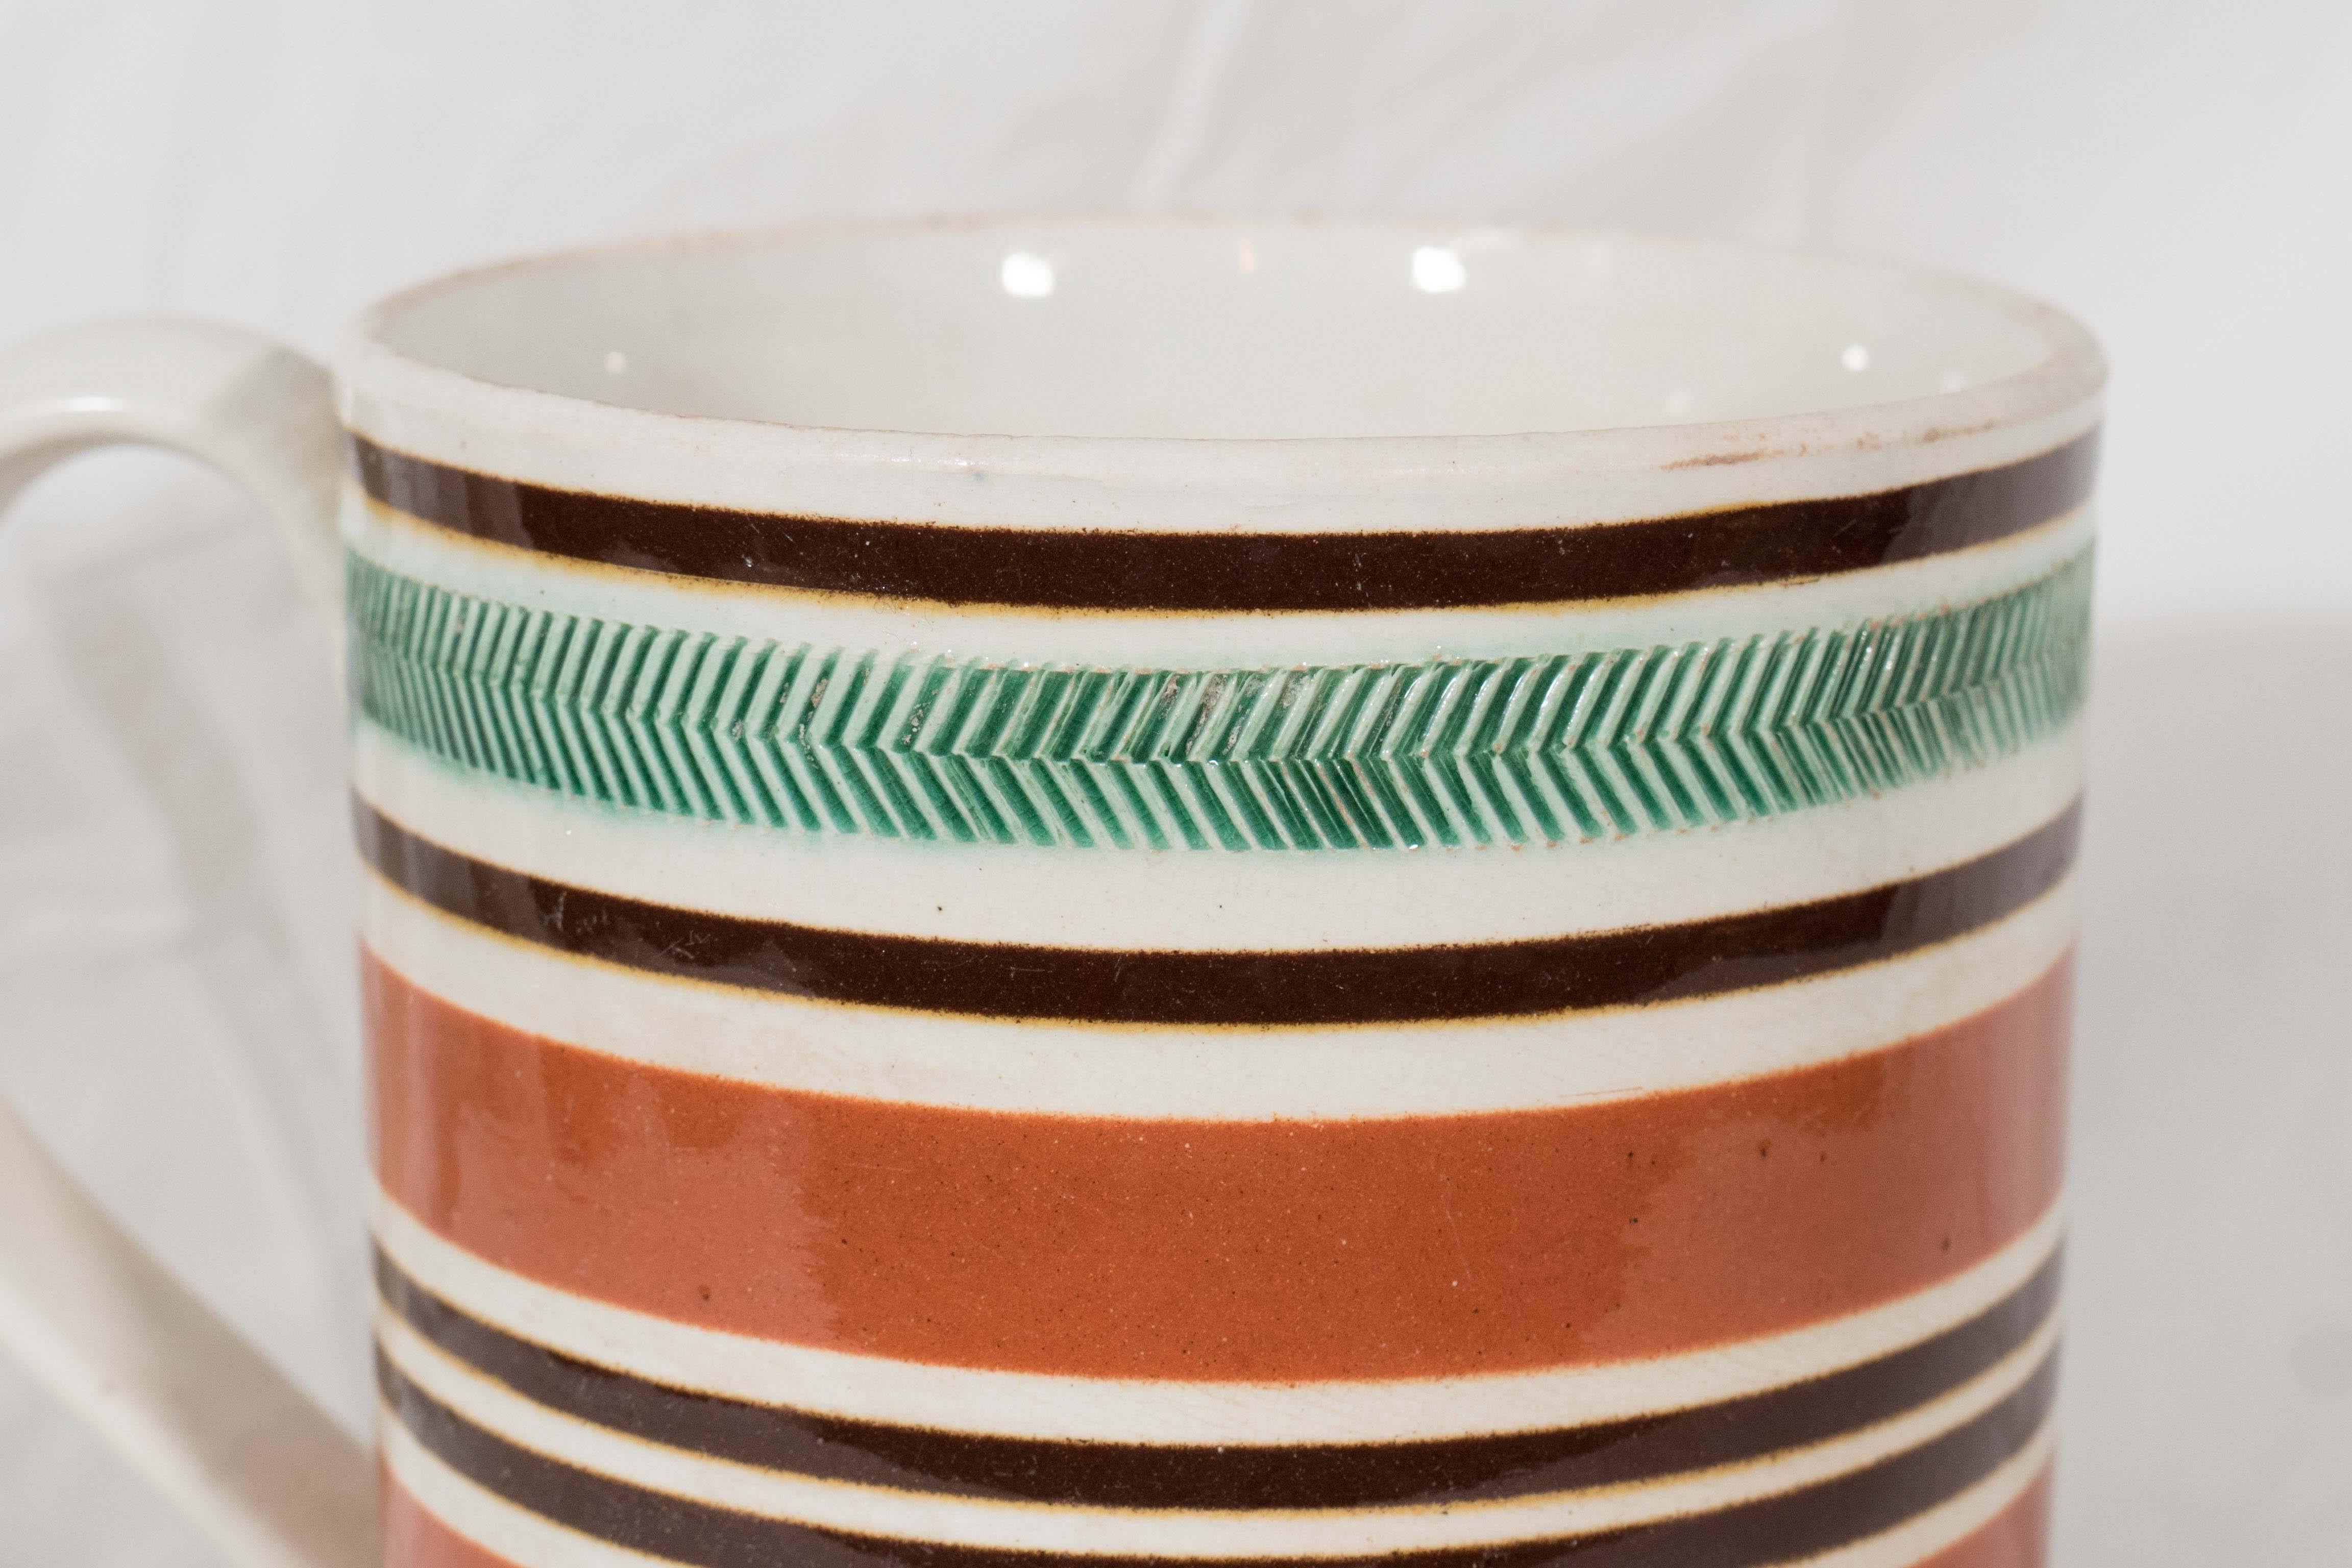 A large antique mocha mug with a pearlware body decorated with concentric bands of brown and green. Around the top of the mug is a band of incised rouletting with green glaze. Below that are alternating thin bands of dark brown and wider bands of